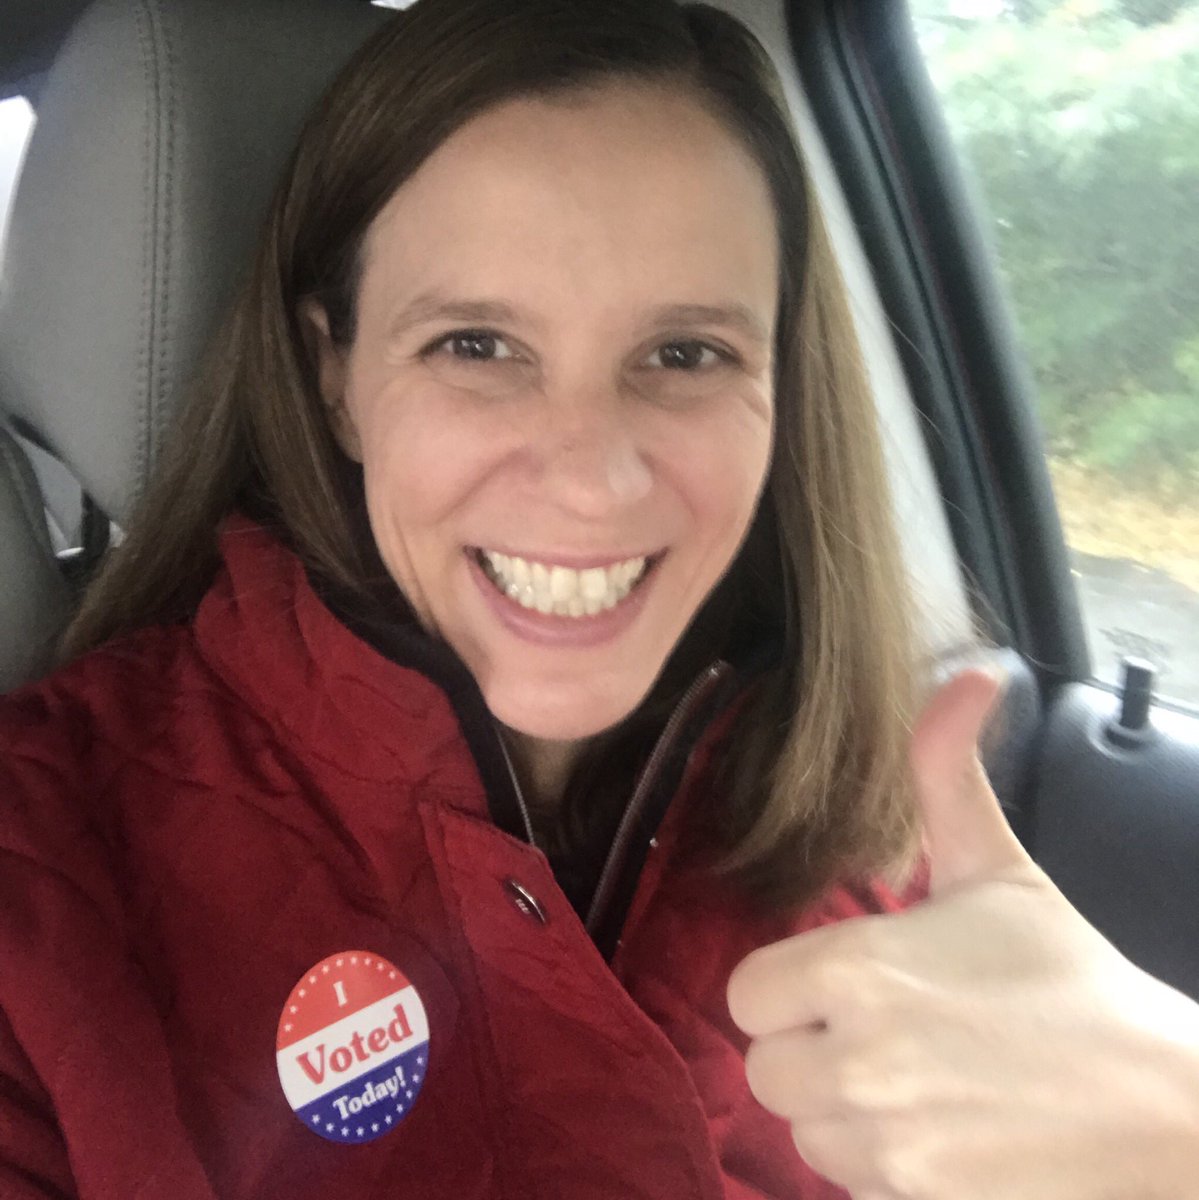 Shout out to the #BurlingtonCT Public Works Department for doing an awesome job directing traffic at the polls today! #IGetParkingAnxiety #IVotedToday #Election2018